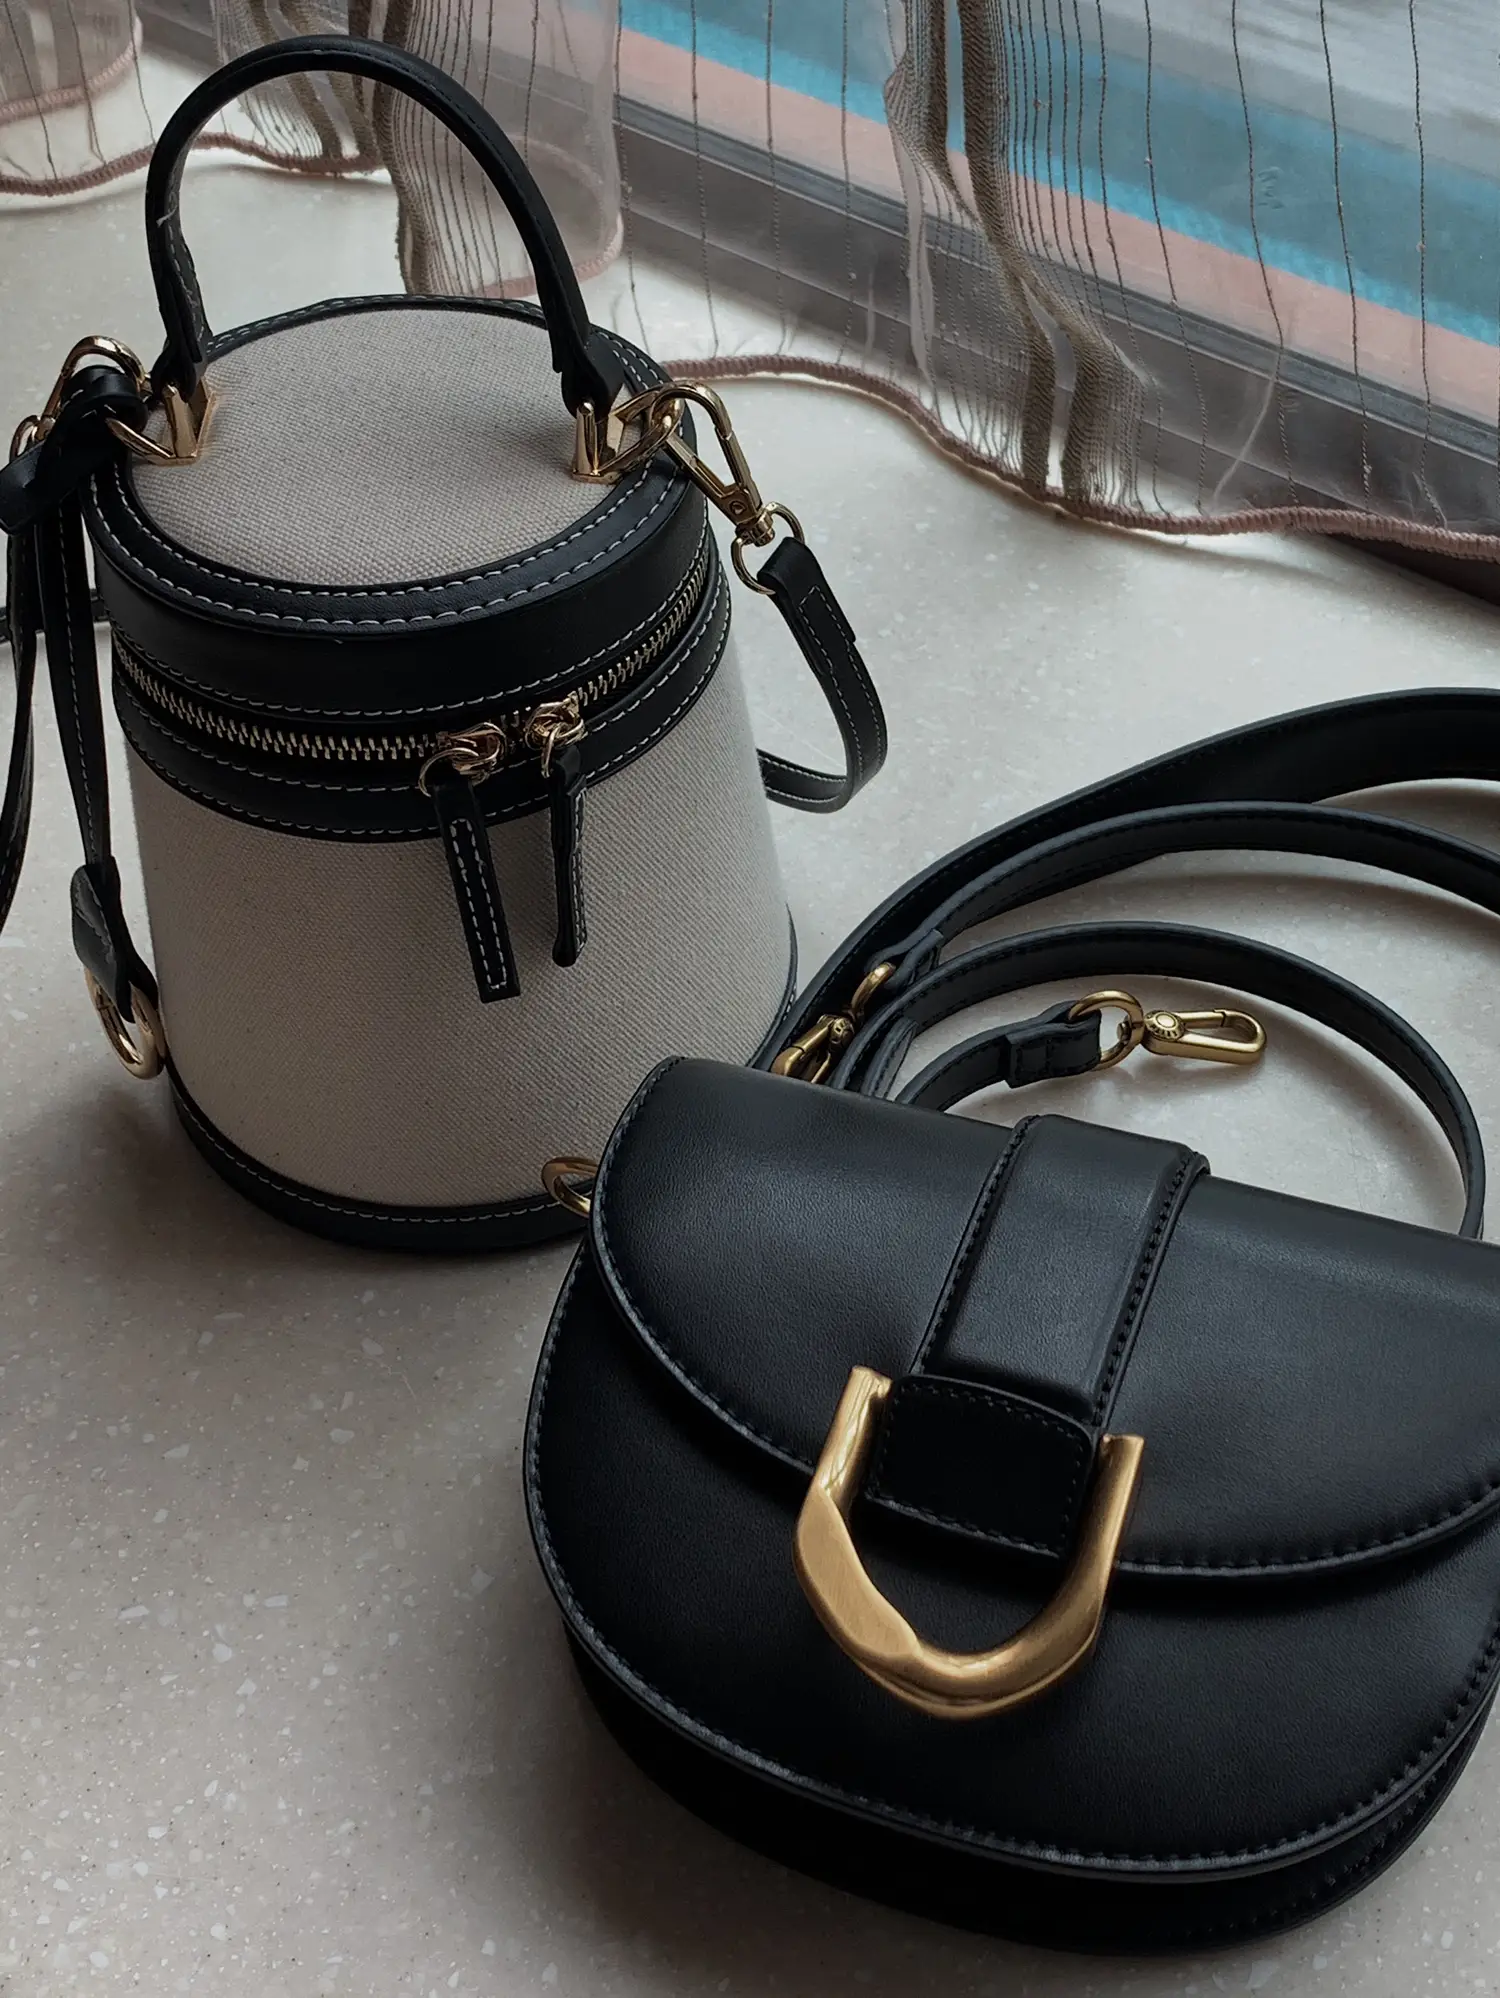 Mini luxury bag haul +tips, Gallery posted by emily✩